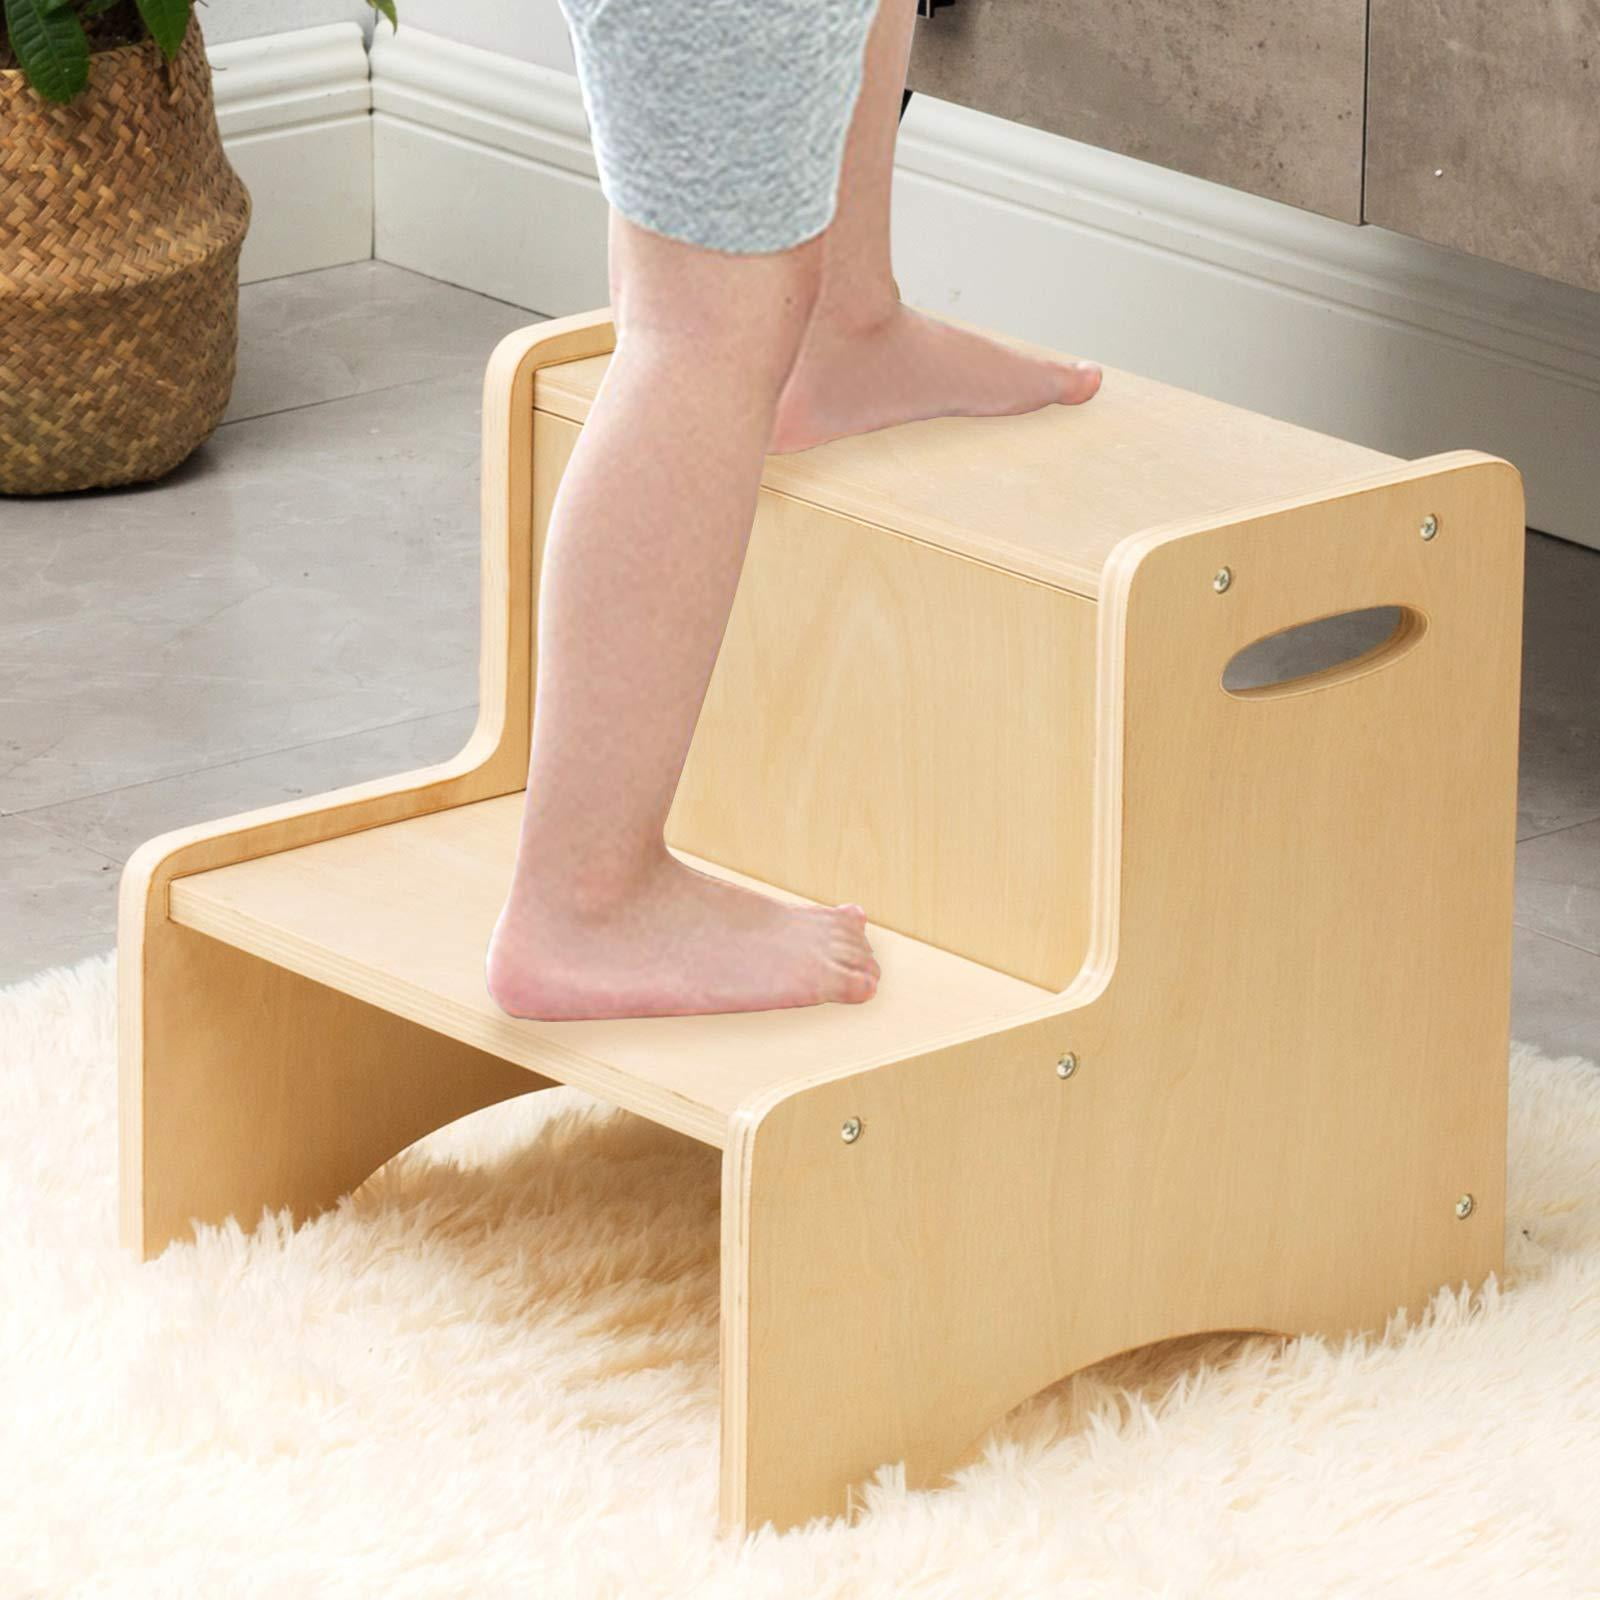 Natural Children's Stool with Handles and Non Slip Pads Holds 200lbs Wood Step Stool for Toddlers Decorative Kitchen Bathroom Potty Stool for Boys and Girls Wooden Step Stools for Kids 2 Pack 